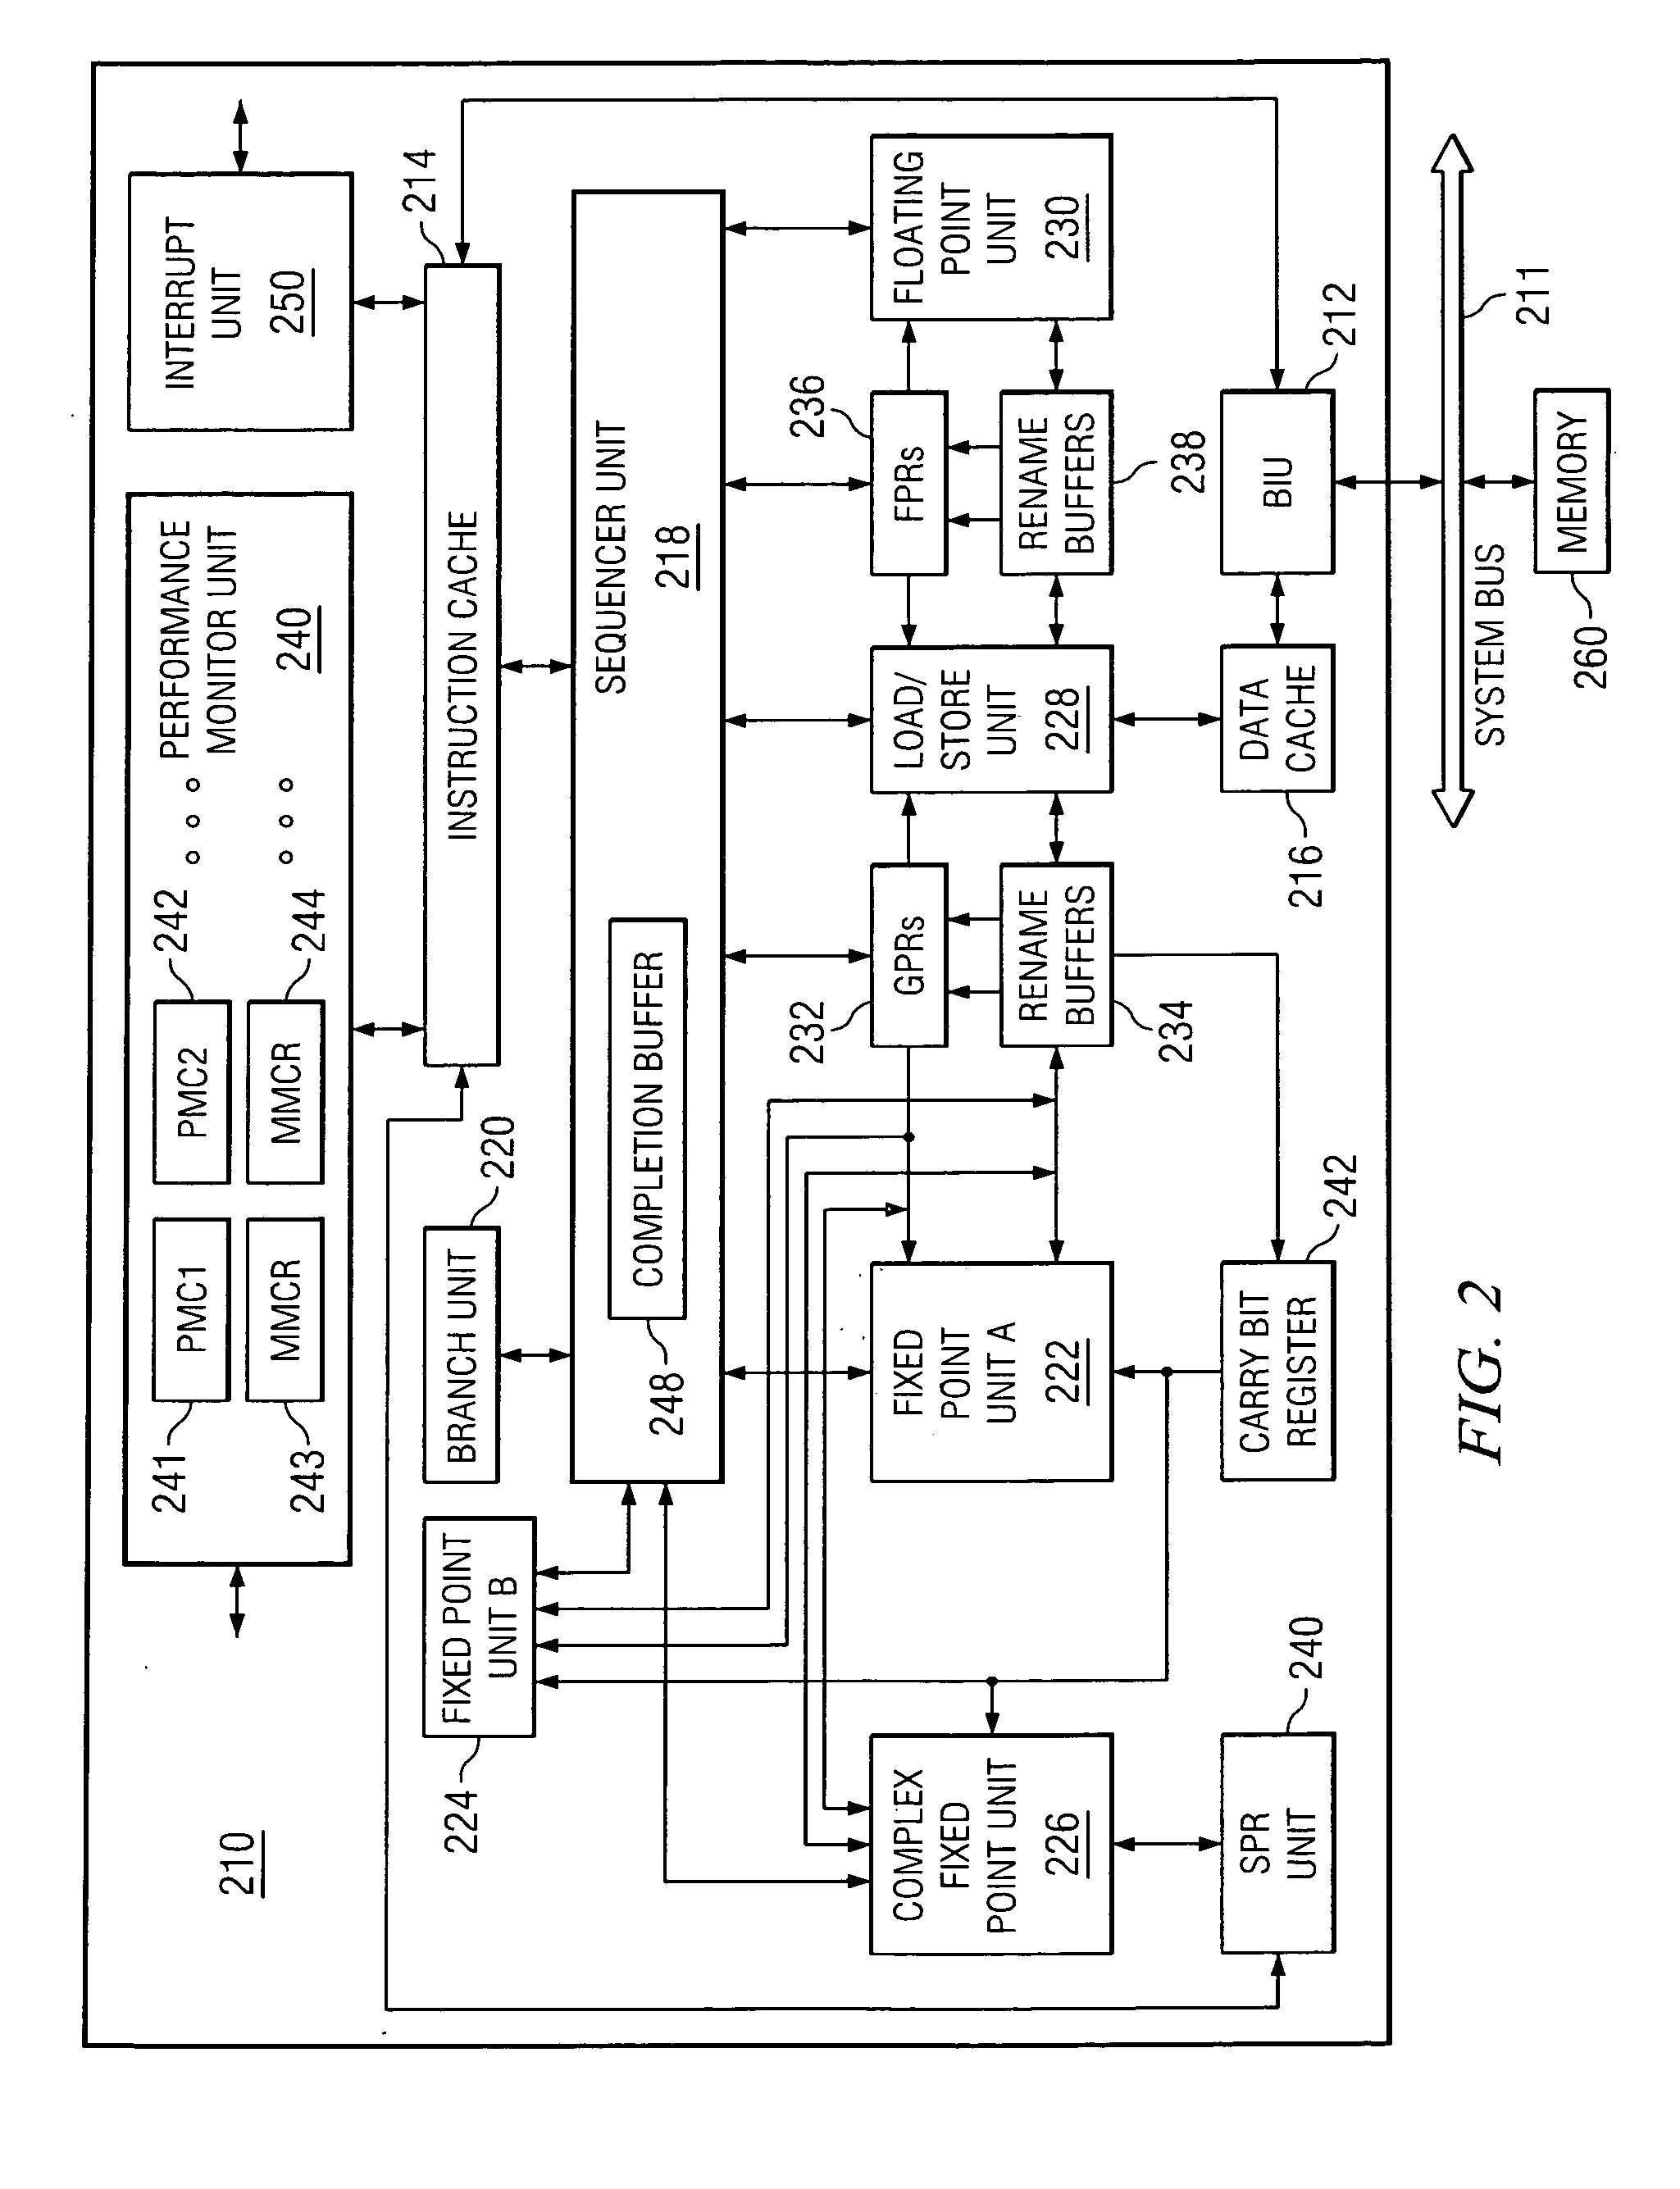 Method and apparatus for identifying access states for variables